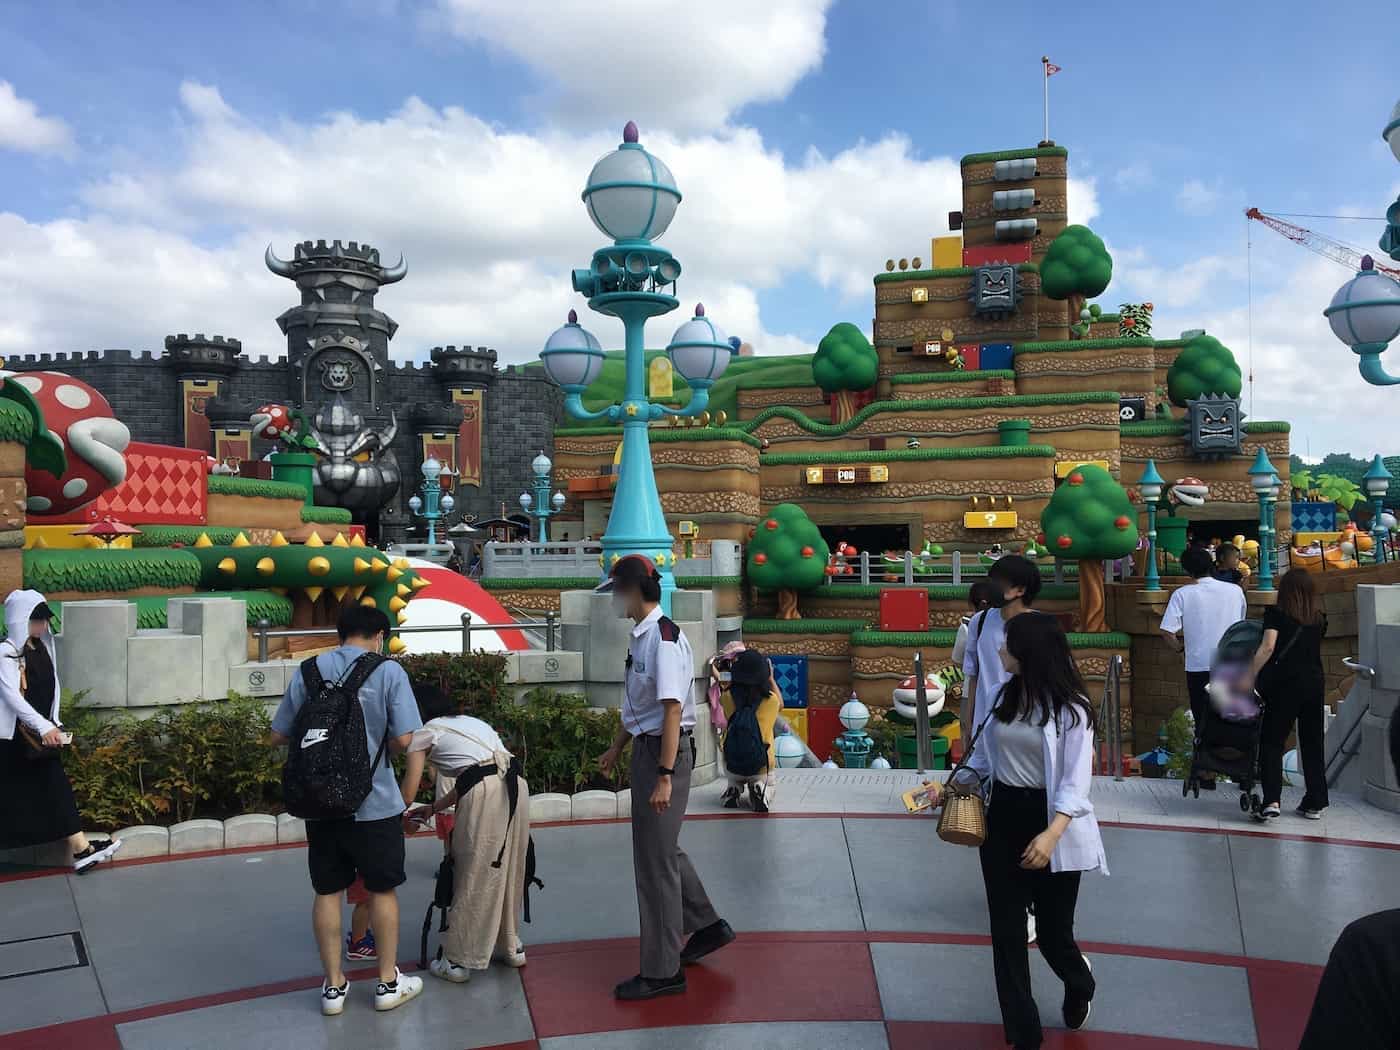 An imposing view of Bowser's Castle, standing prominently in the distance, at Super Nintendo World.